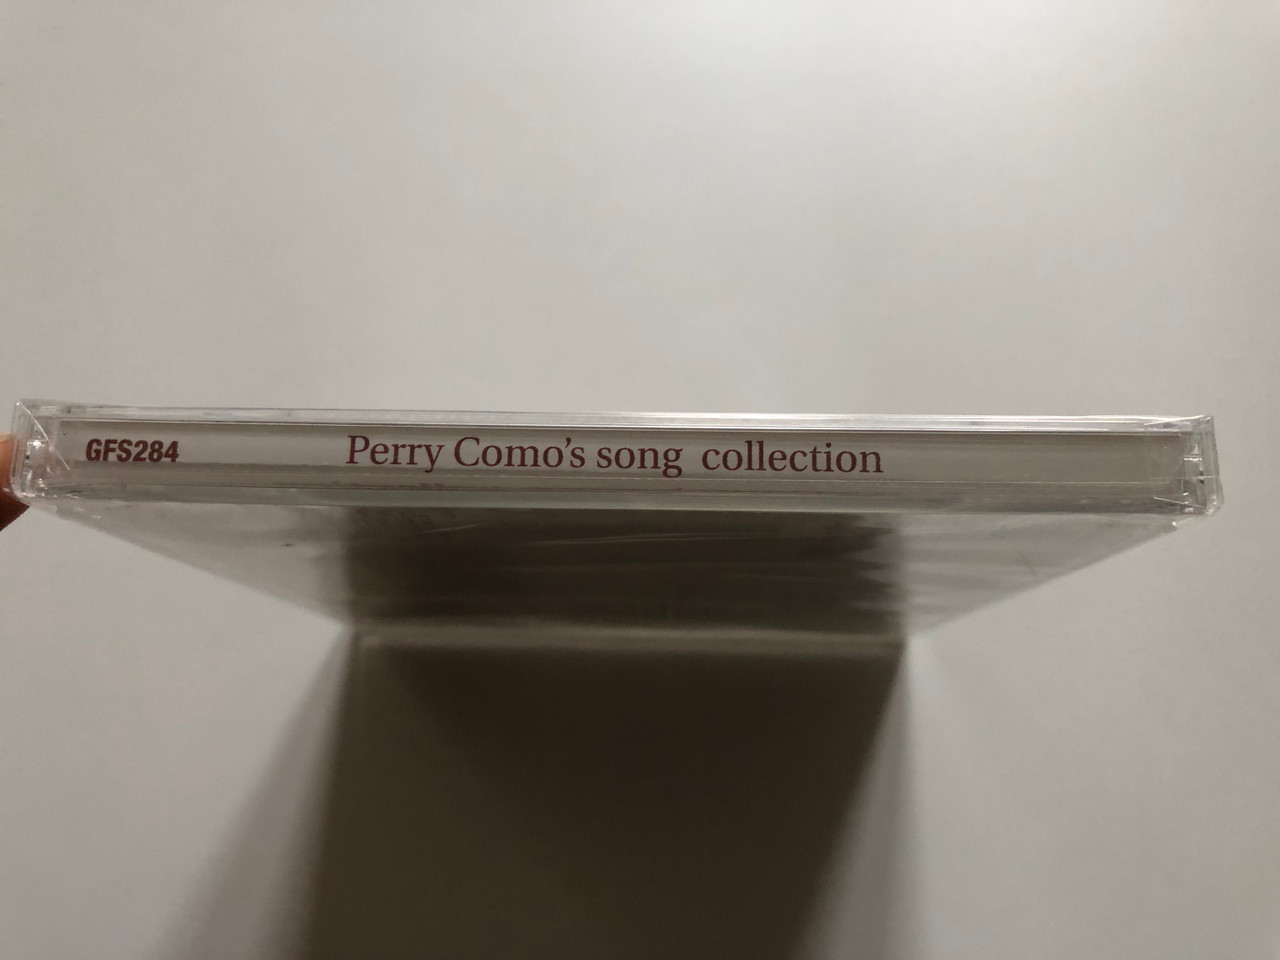 https://cdn10.bigcommerce.com/s-62bdpkt7pb/products/0/images/221170/Perry_Comos_Song_Collection_Including_Lazy_Bones_My_Ideal_I_Have_Faith_and_many_more_Going_For_A_Song_Audio_CD_GFS284_3__81876.1649412210.1280.1280.JPG?c=2&_gl=1*1p87a8s*_ga*MjA2NTIxMjE2MC4xNTkwNTEyNTMy*_ga_WS2VZYPC6G*MTY0OTQwOTM3NC4zNDkuMS4xNjQ5NDEyMDQ2LjQy